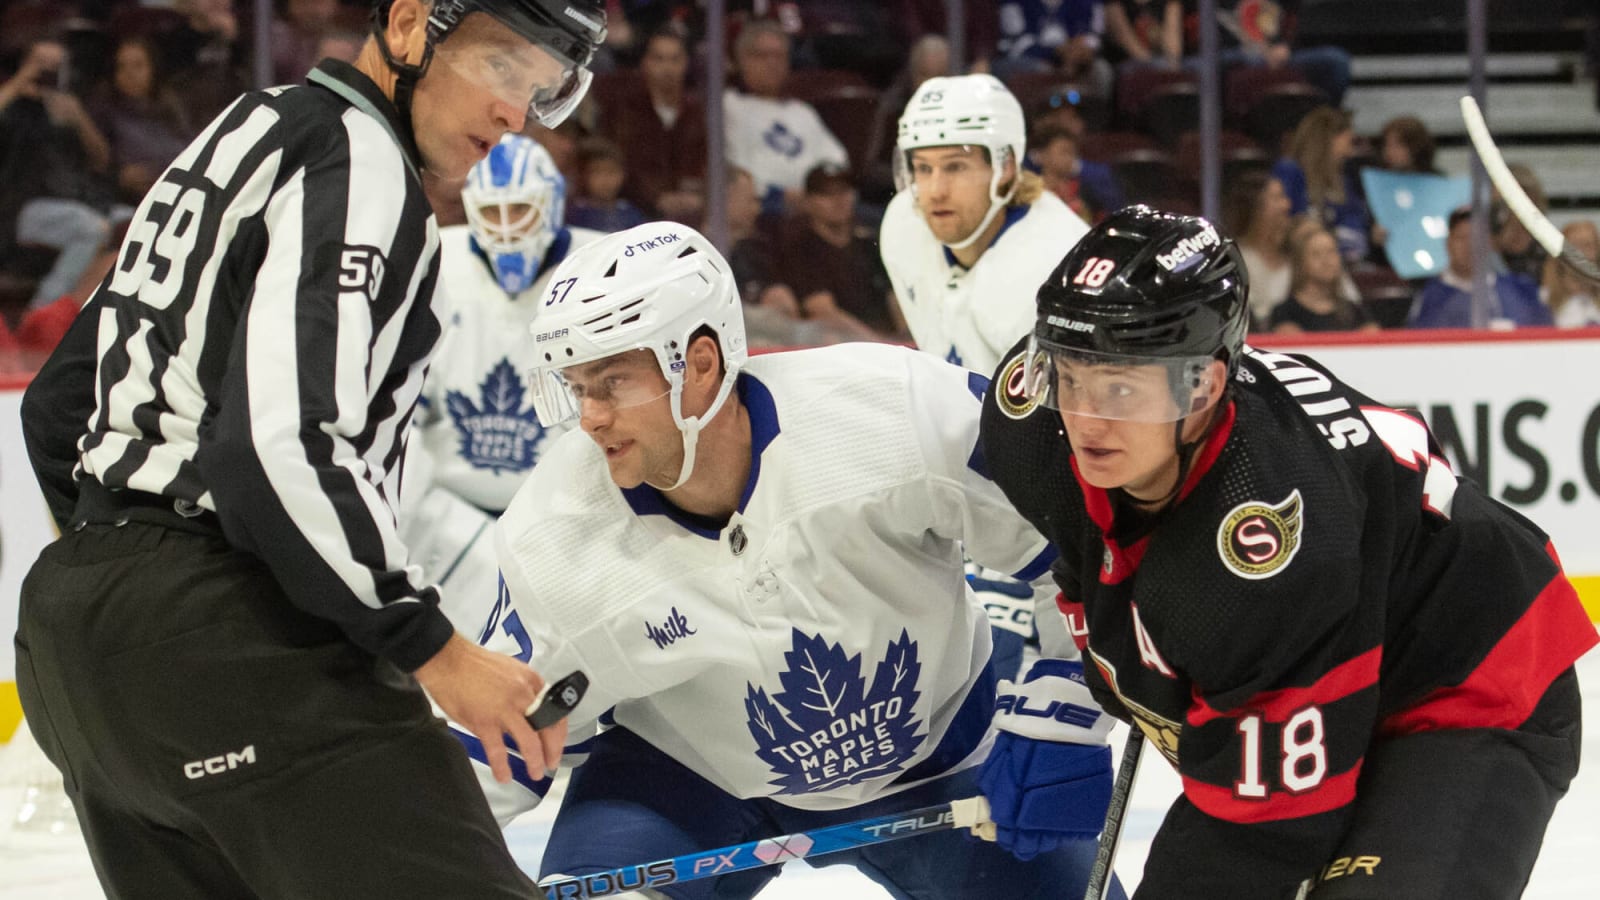 Gambrell out, Frasca returned, and Timmins needs to be consistent: Maple Leafs News and Notes